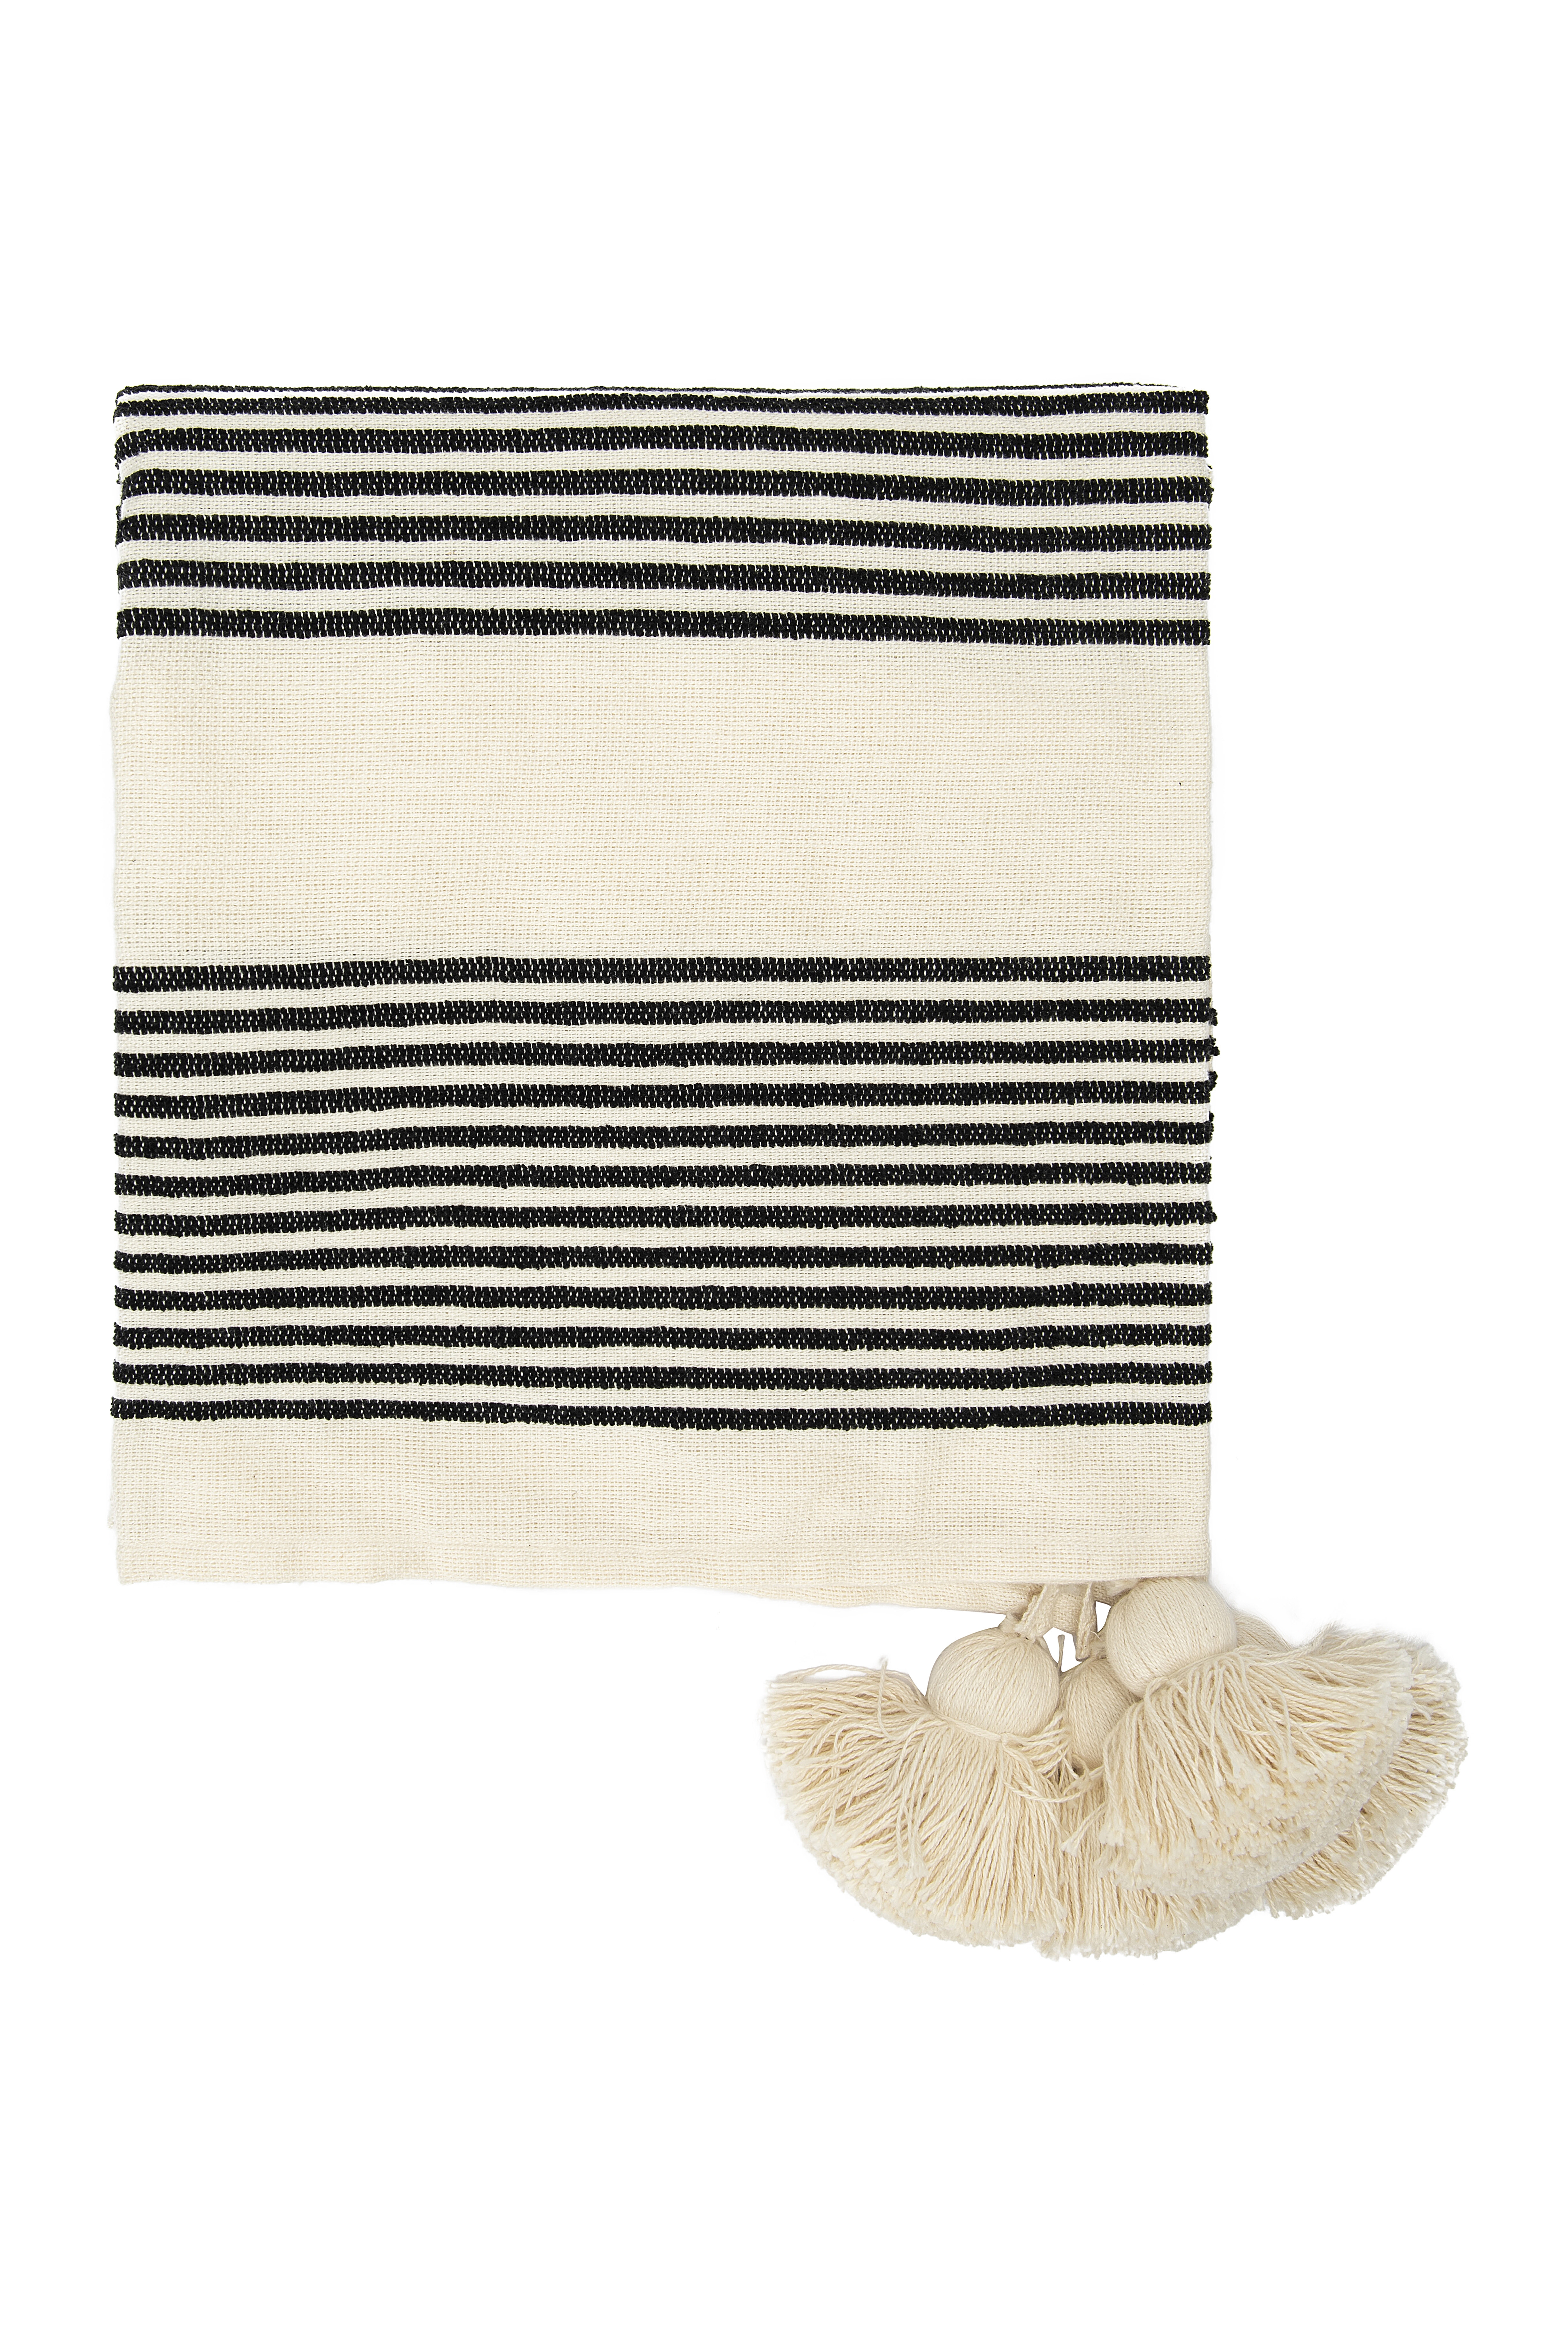 Cotton & Chenille Woven Throw with Stripes & Tassels - Image 0